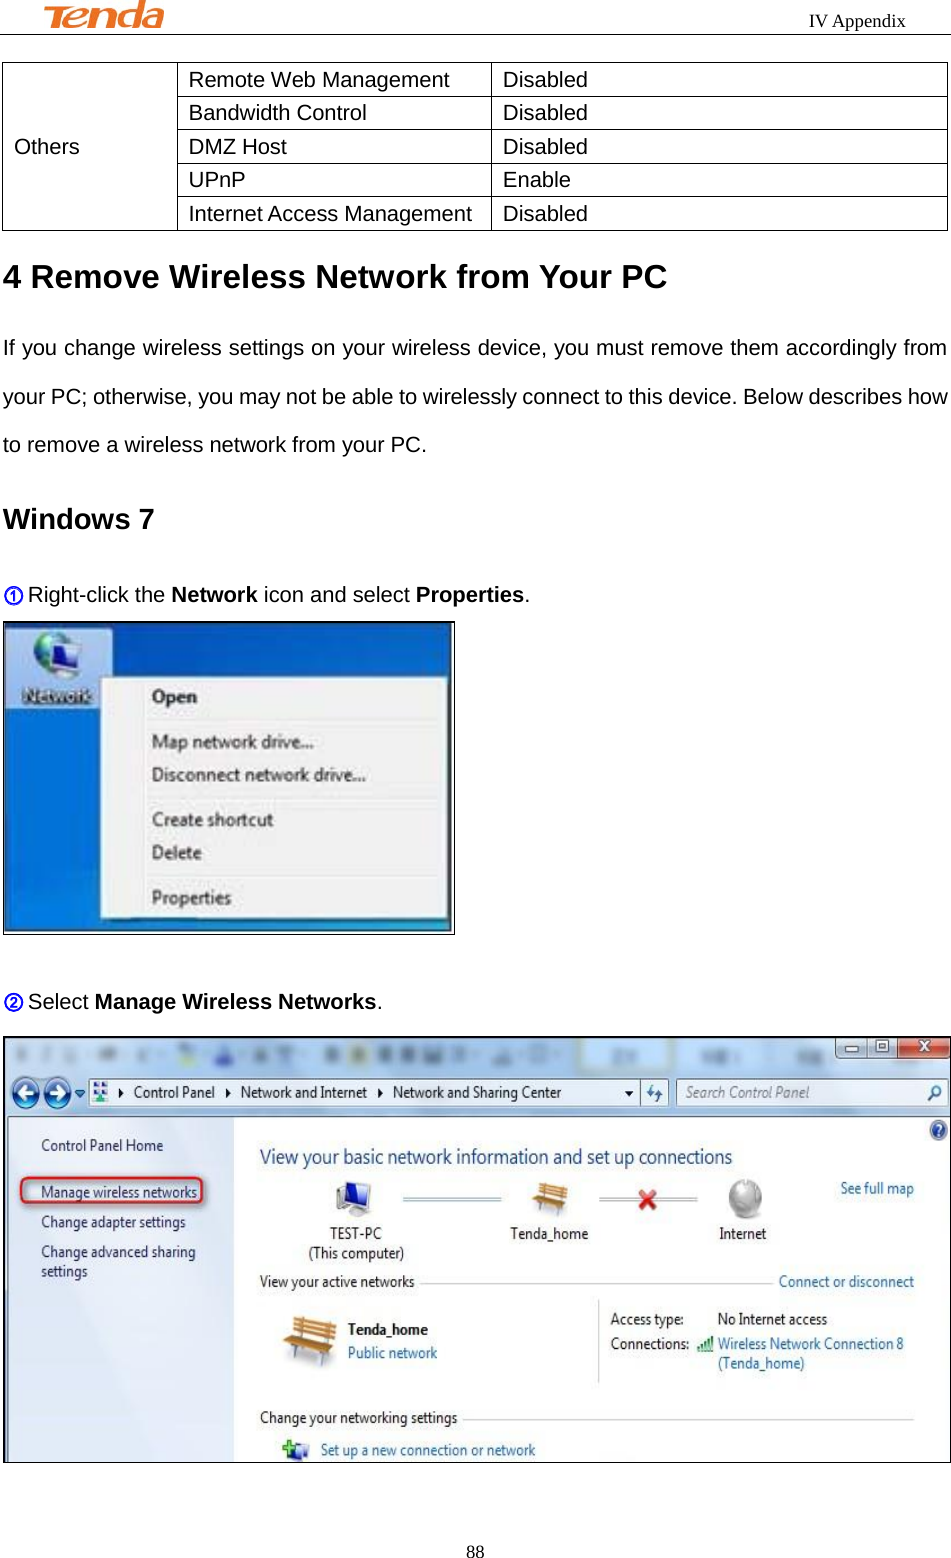                                                            IV Appendix     88 Others Remote Web Management  Disabled Bandwidth Control  Disabled DMZ Host  Disabled UPnP  Enable Internet Access Management  Disabled 4 Remove Wireless Network from Your PC If you change wireless settings on your wireless device, you must remove them accordingly from your PC; otherwise, you may not be able to wirelessly connect to this device. Below describes how to remove a wireless network from your PC. Windows 7 ① Right-click the Network icon and select Properties.   ② Select Manage Wireless Networks.  